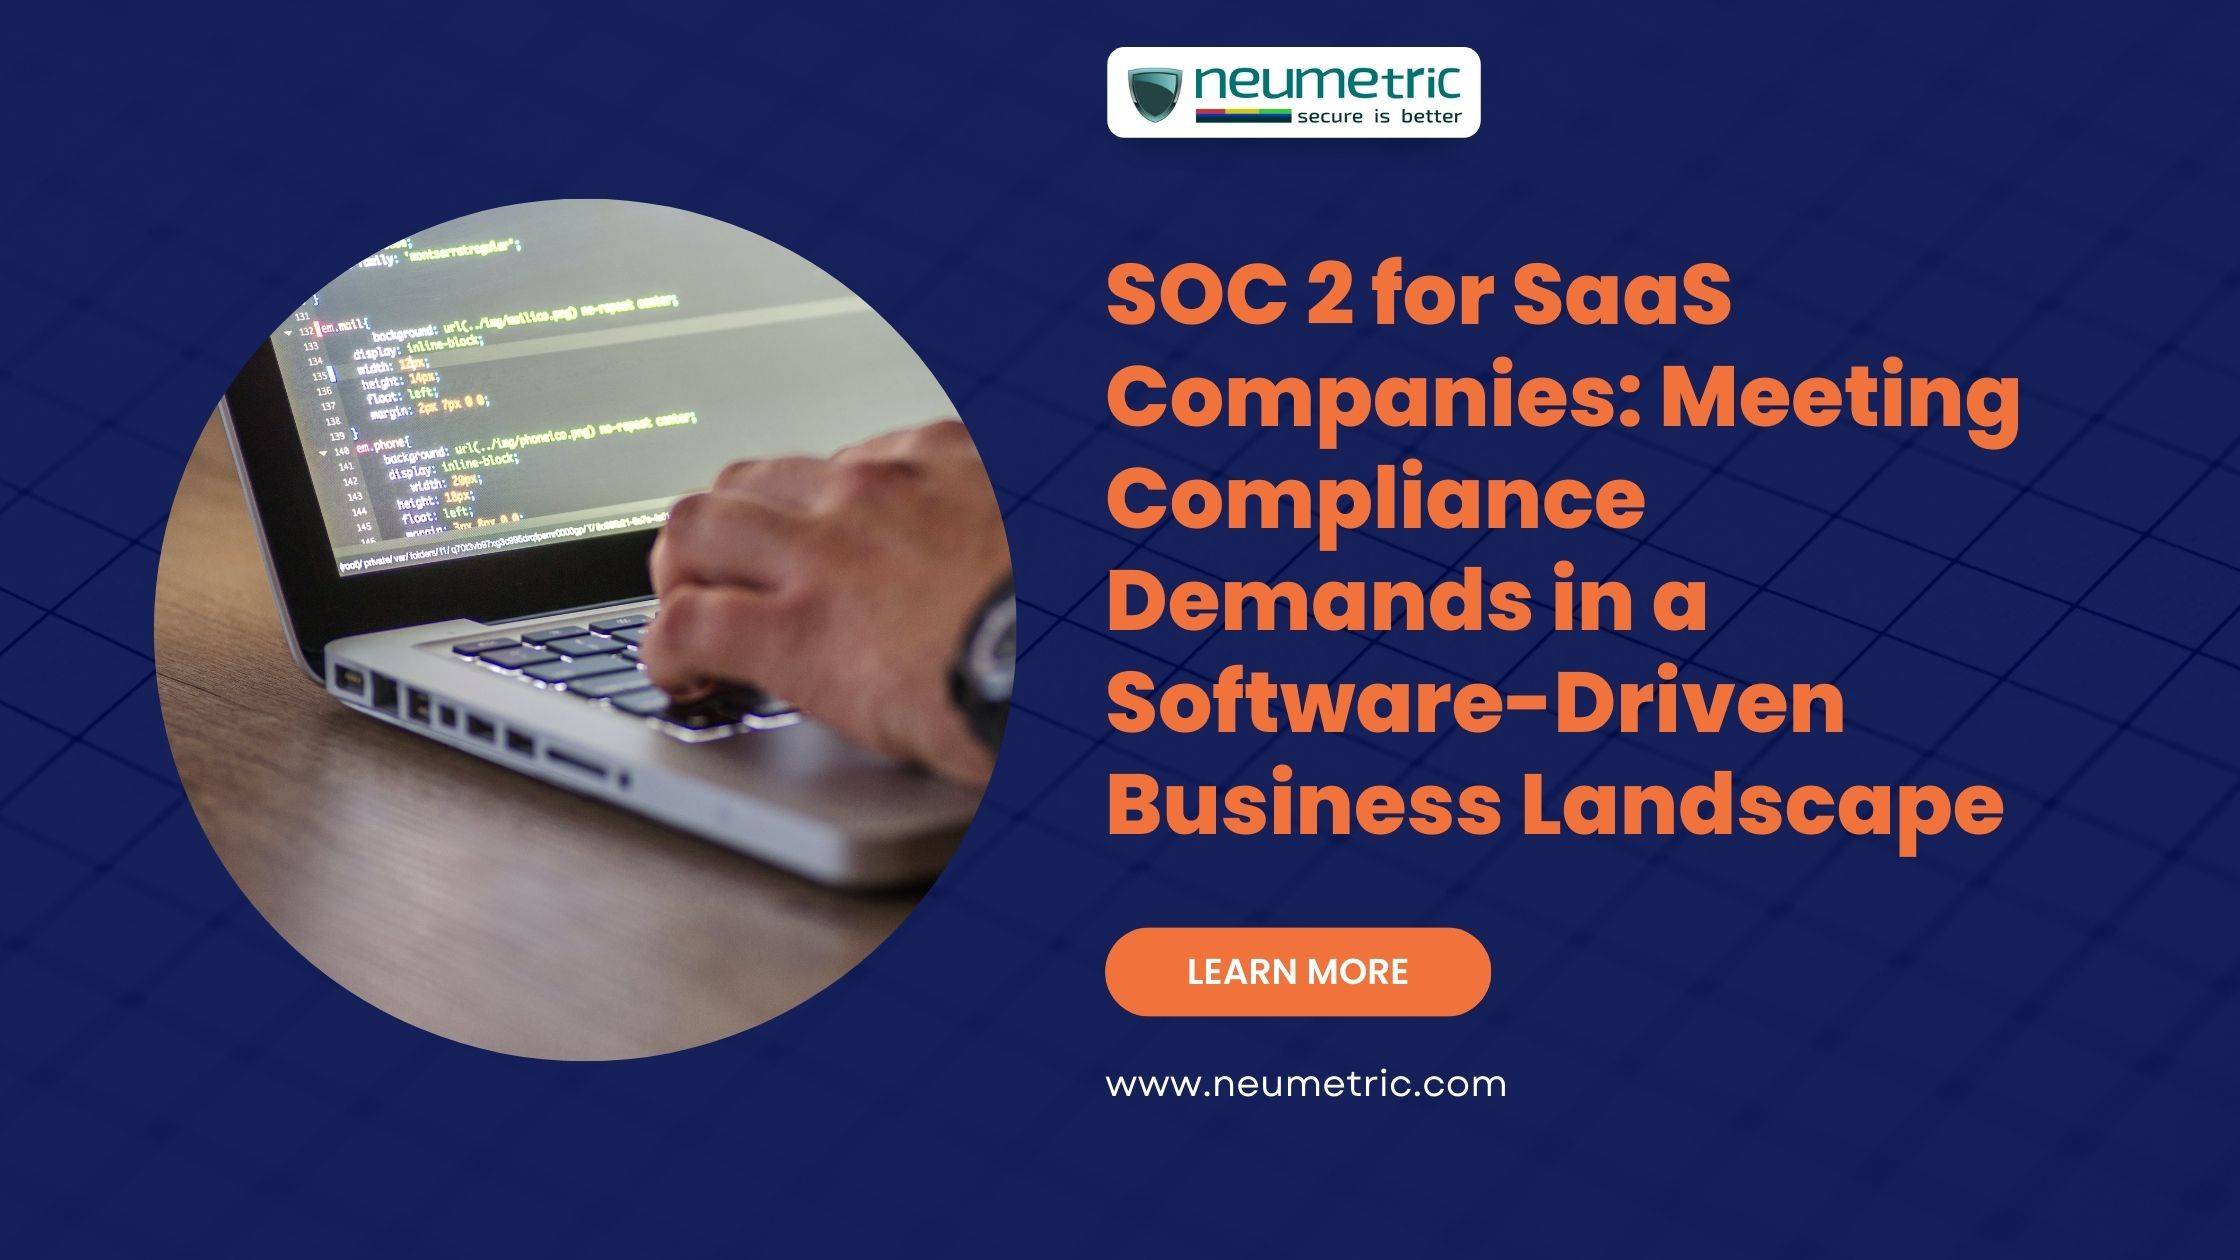 SOC 2 for SaaS Companies: Meeting Compliance Demands in a Software-Driven Business Landscape 